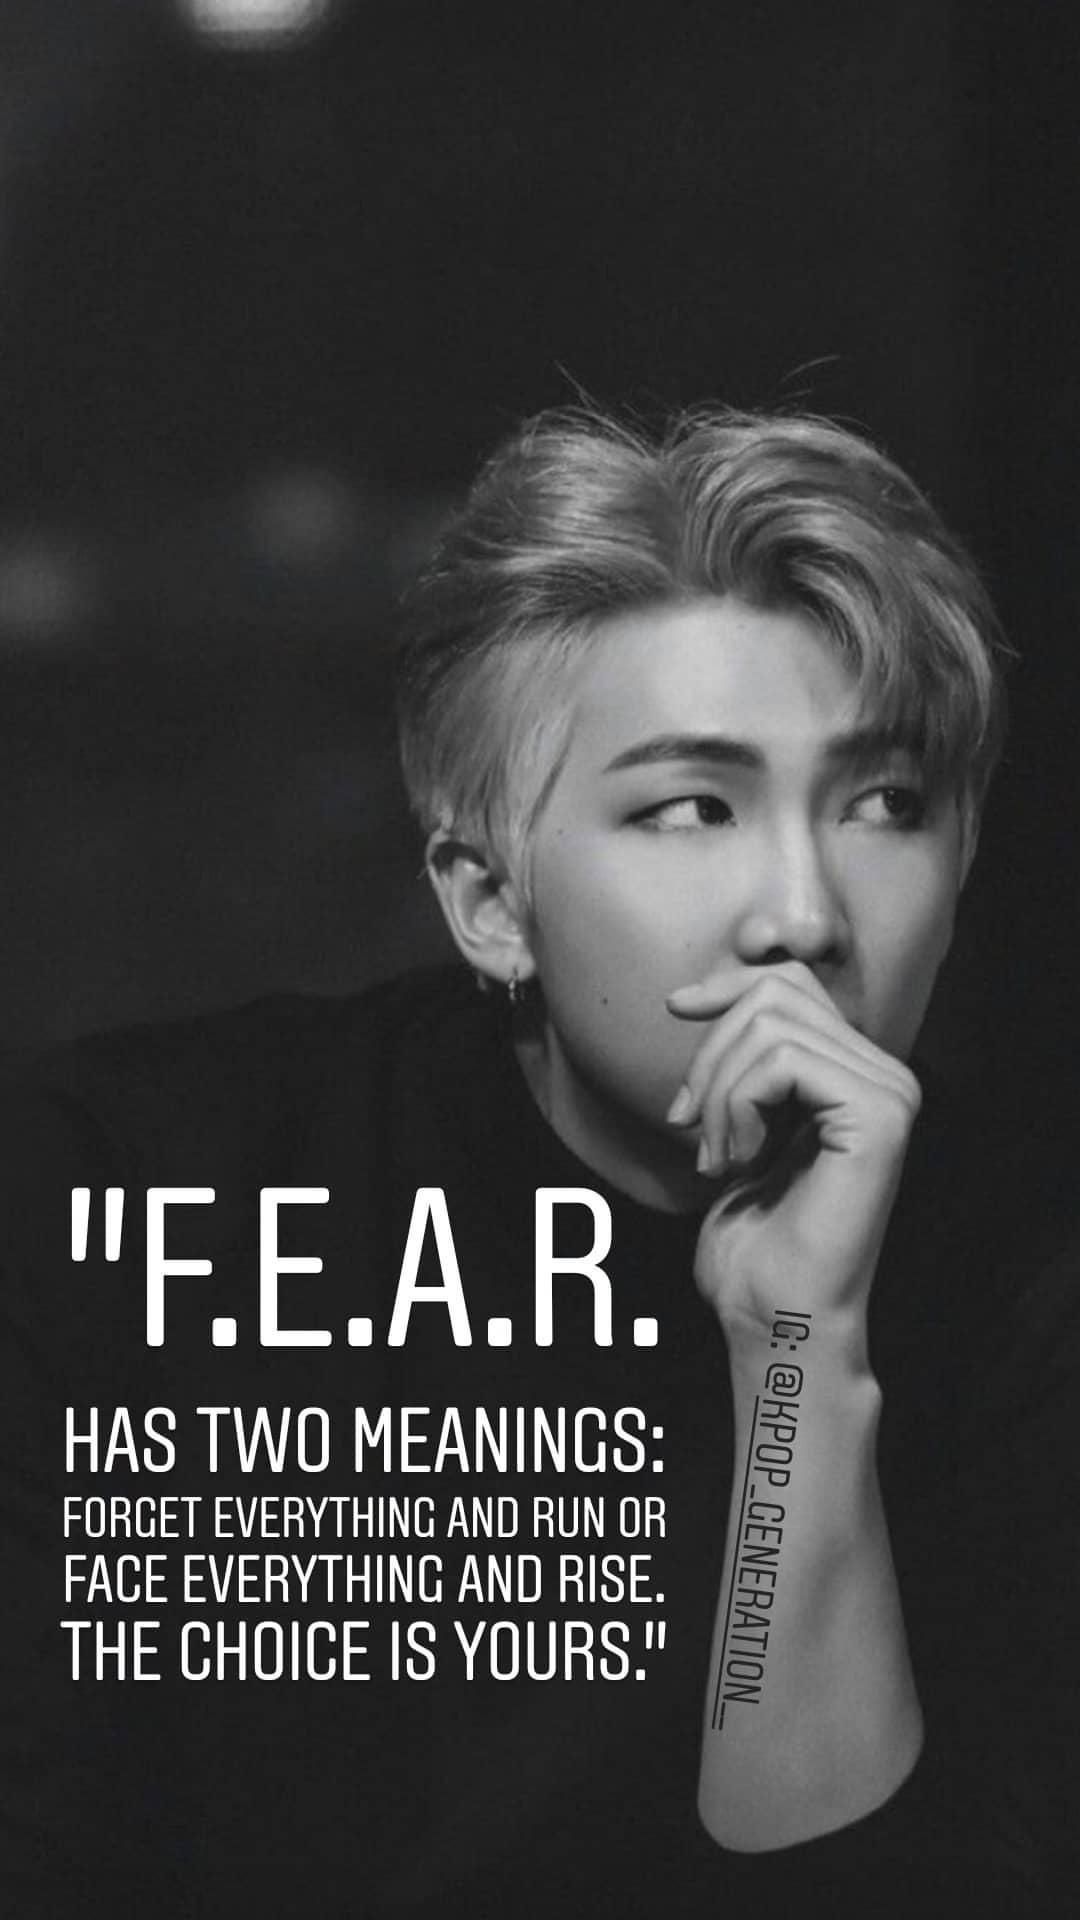 Top 5 Inspiring BTS Quotes to Elevate Your Mood